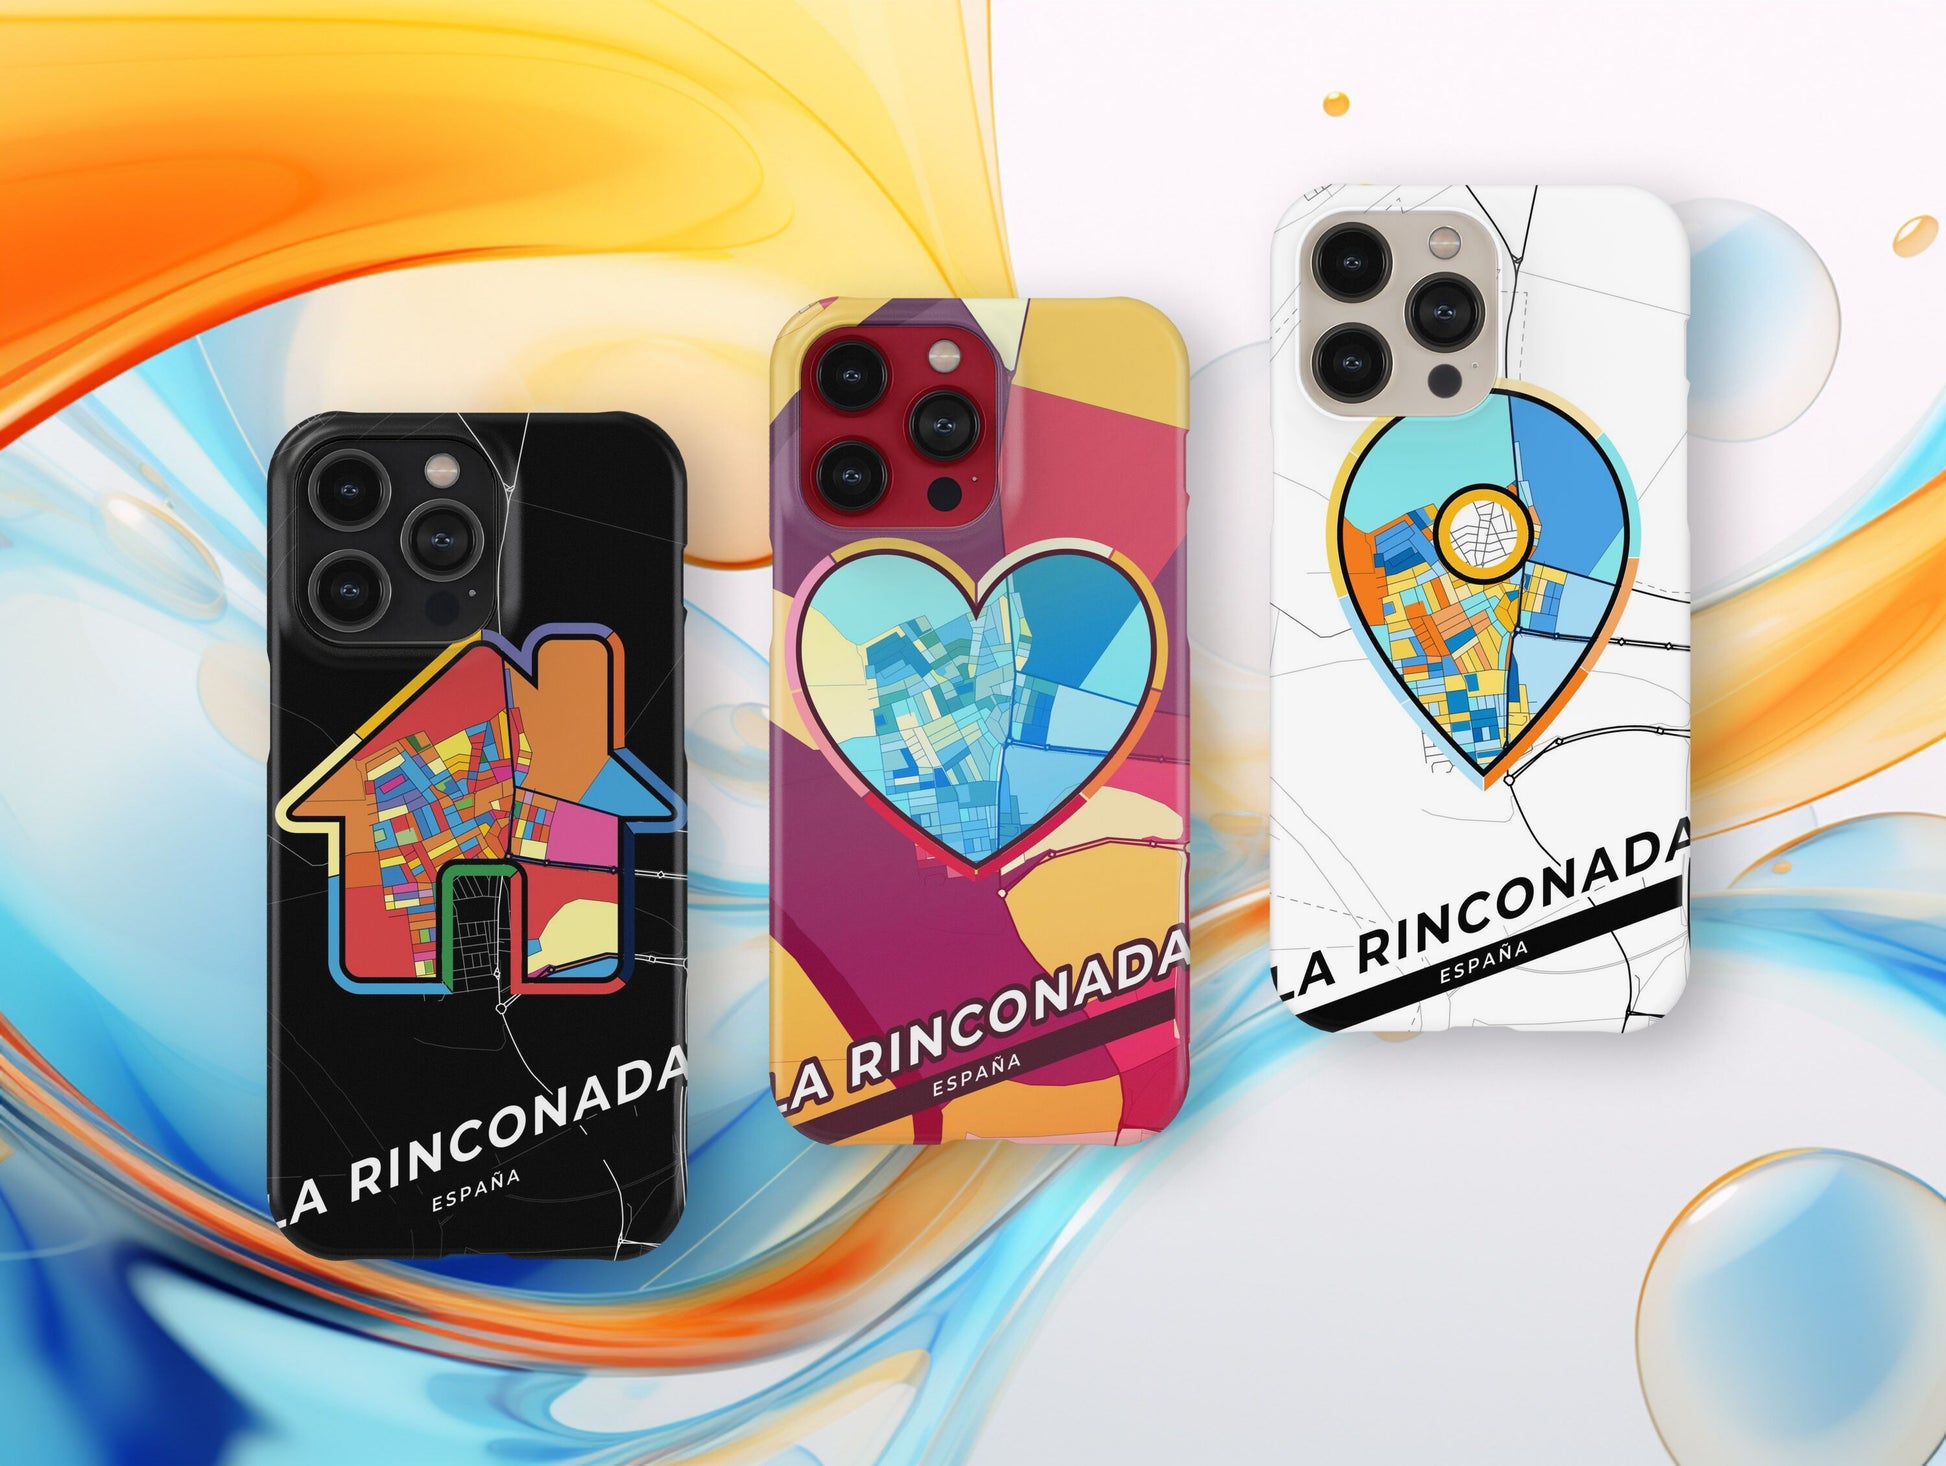 La Rinconada Spain slim phone case with colorful icon. Birthday, wedding or housewarming gift. Couple match cases.